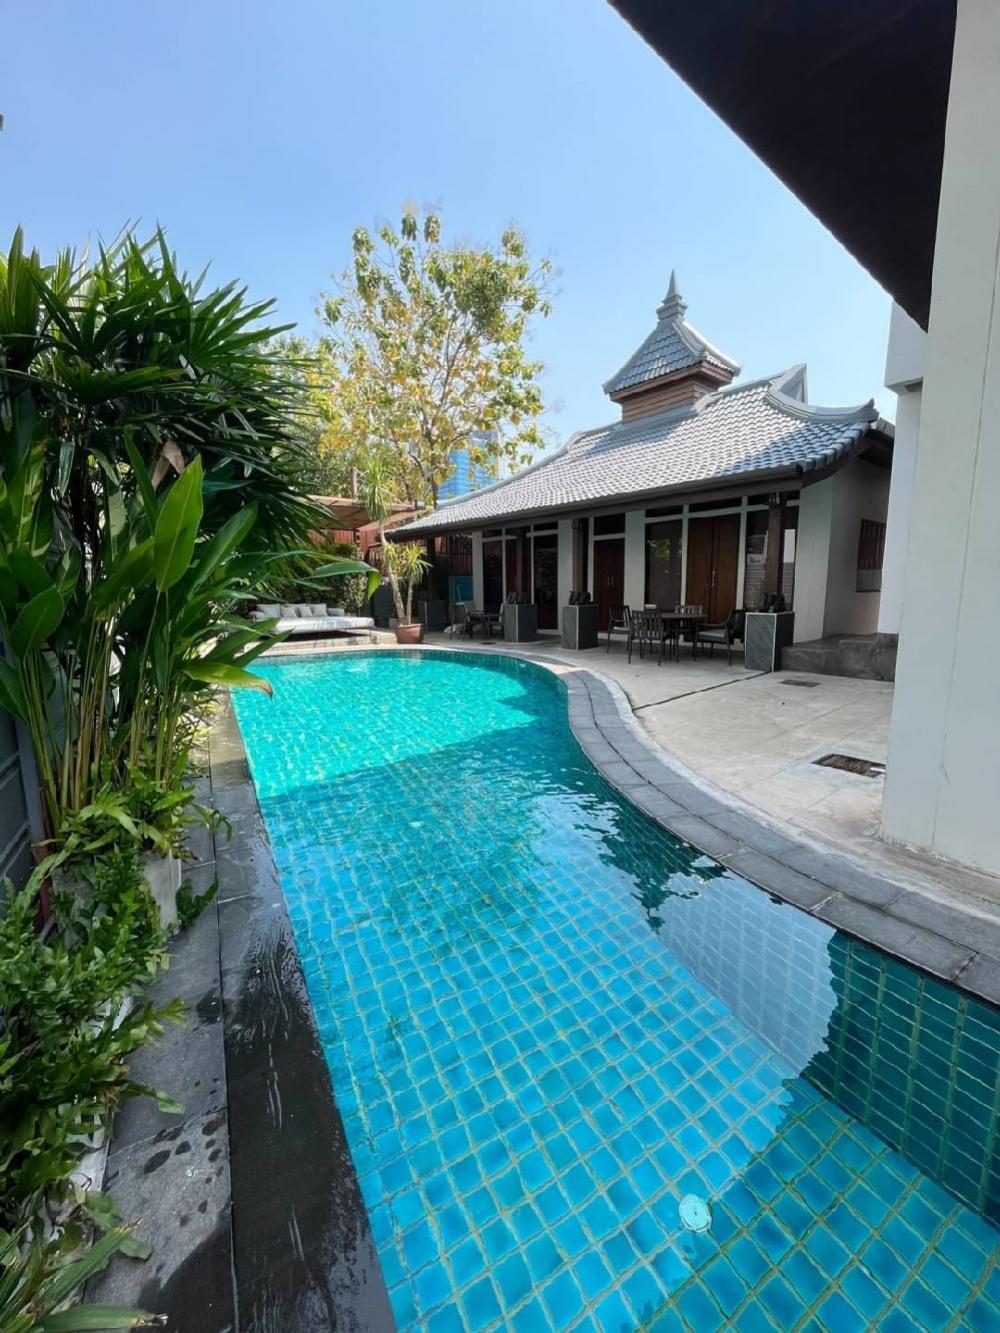 For RentHouseSukhumvit, Asoke, Thonglor : Luxury house for rent with private pool. Thonglor area, area 1,000 sq m. 5 bedrooms, 6 bathrooms